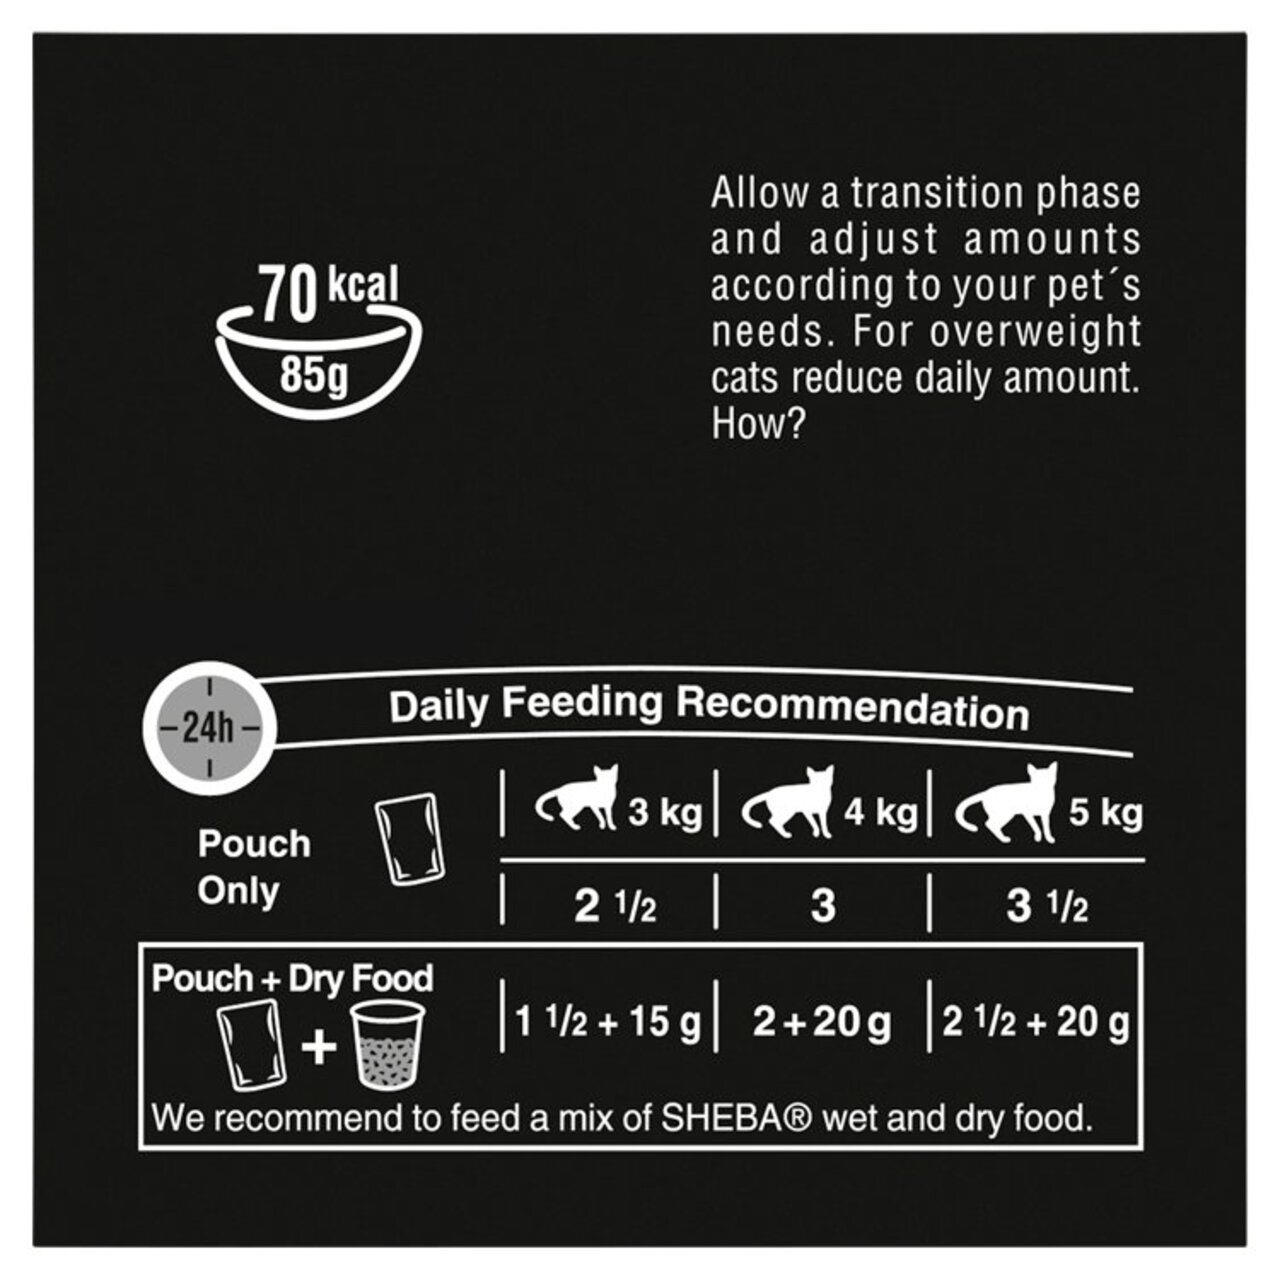 Sheba Select Slices Cat Food Pouches Poultry in Gravy 12 x 85g